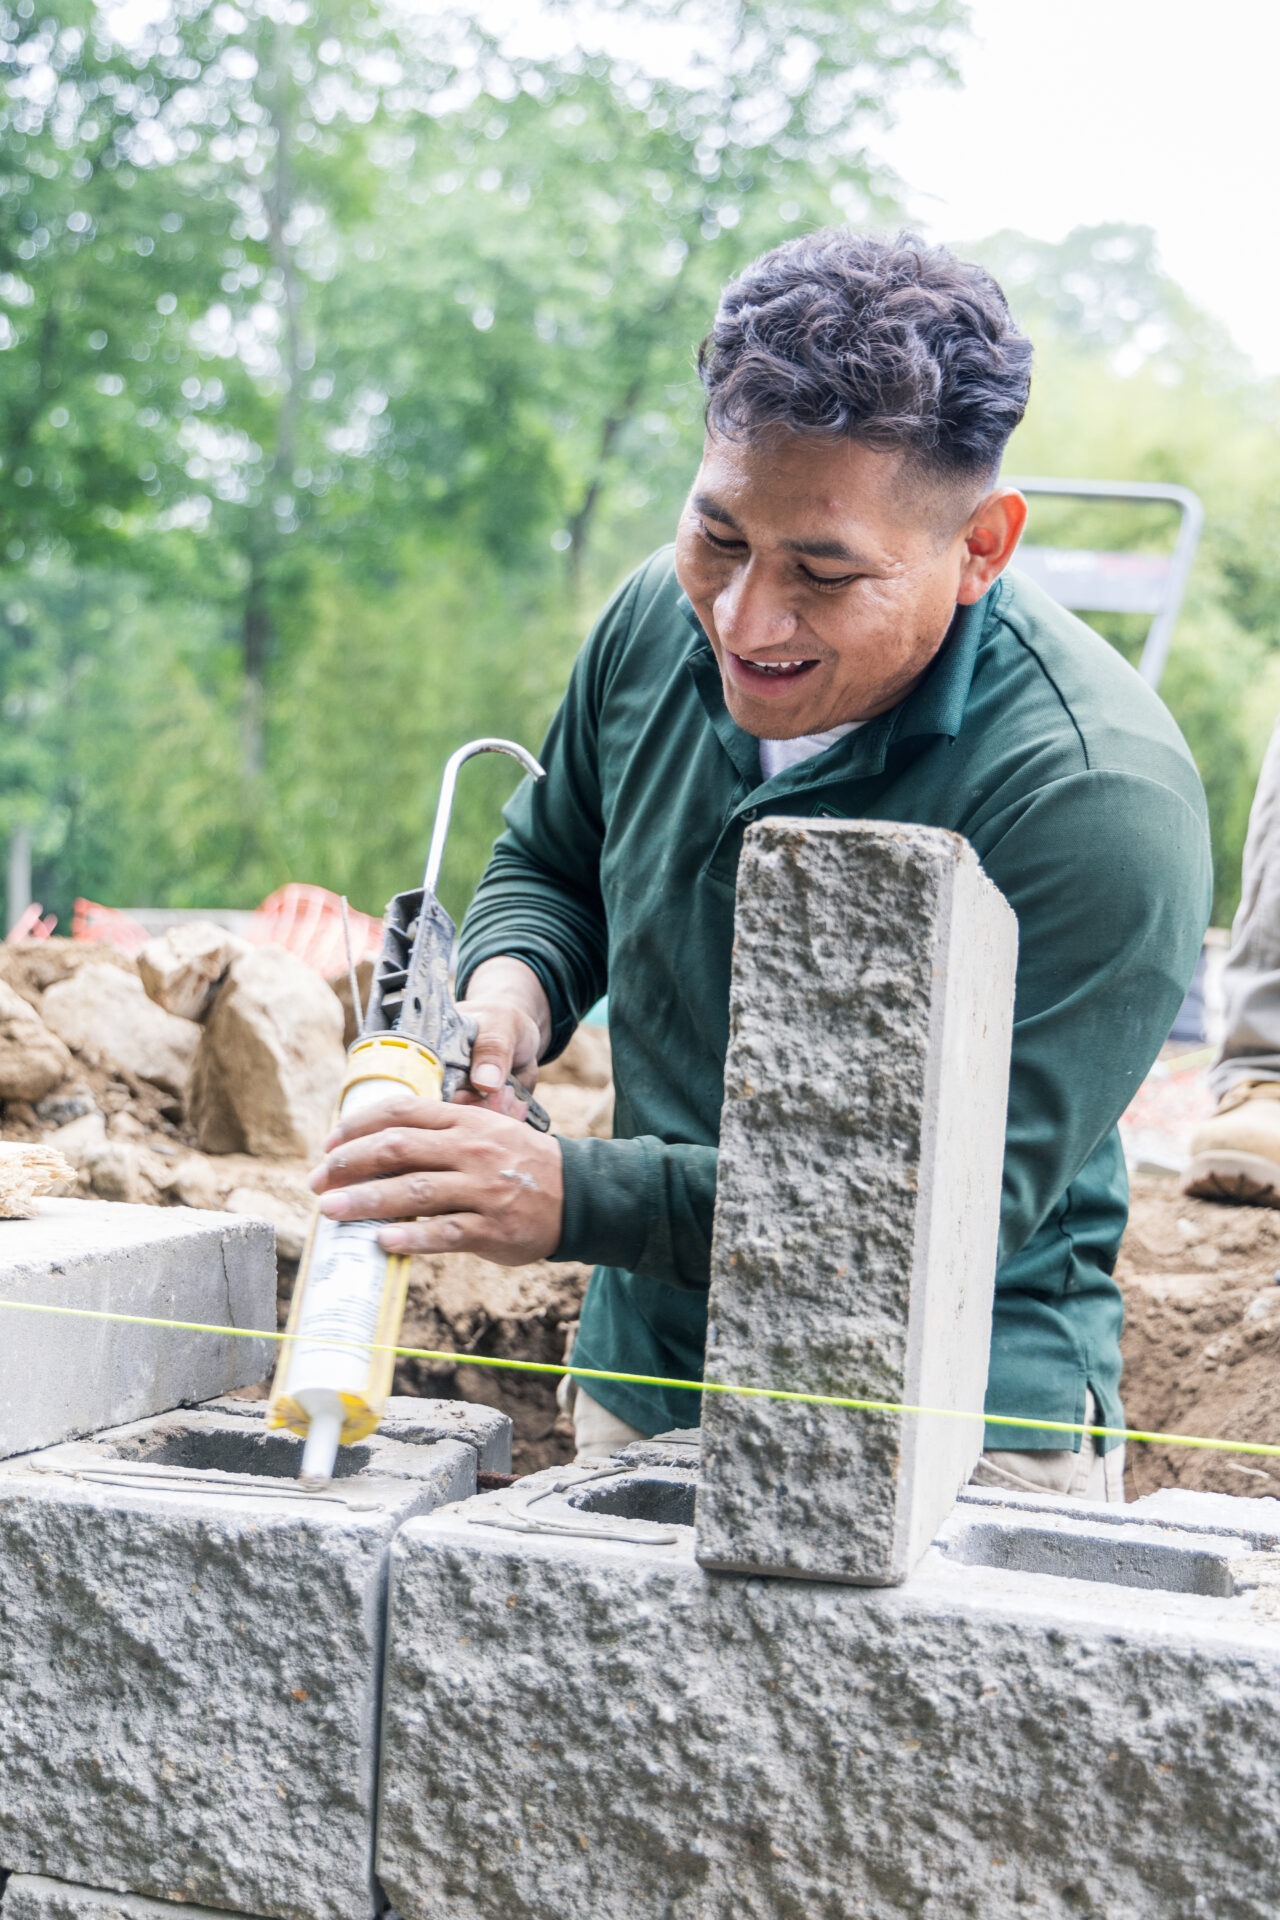 A person is applying adhesive from a caulk gun to concrete blocks, smiling while focused on construction work outdoors with greenery in the background.